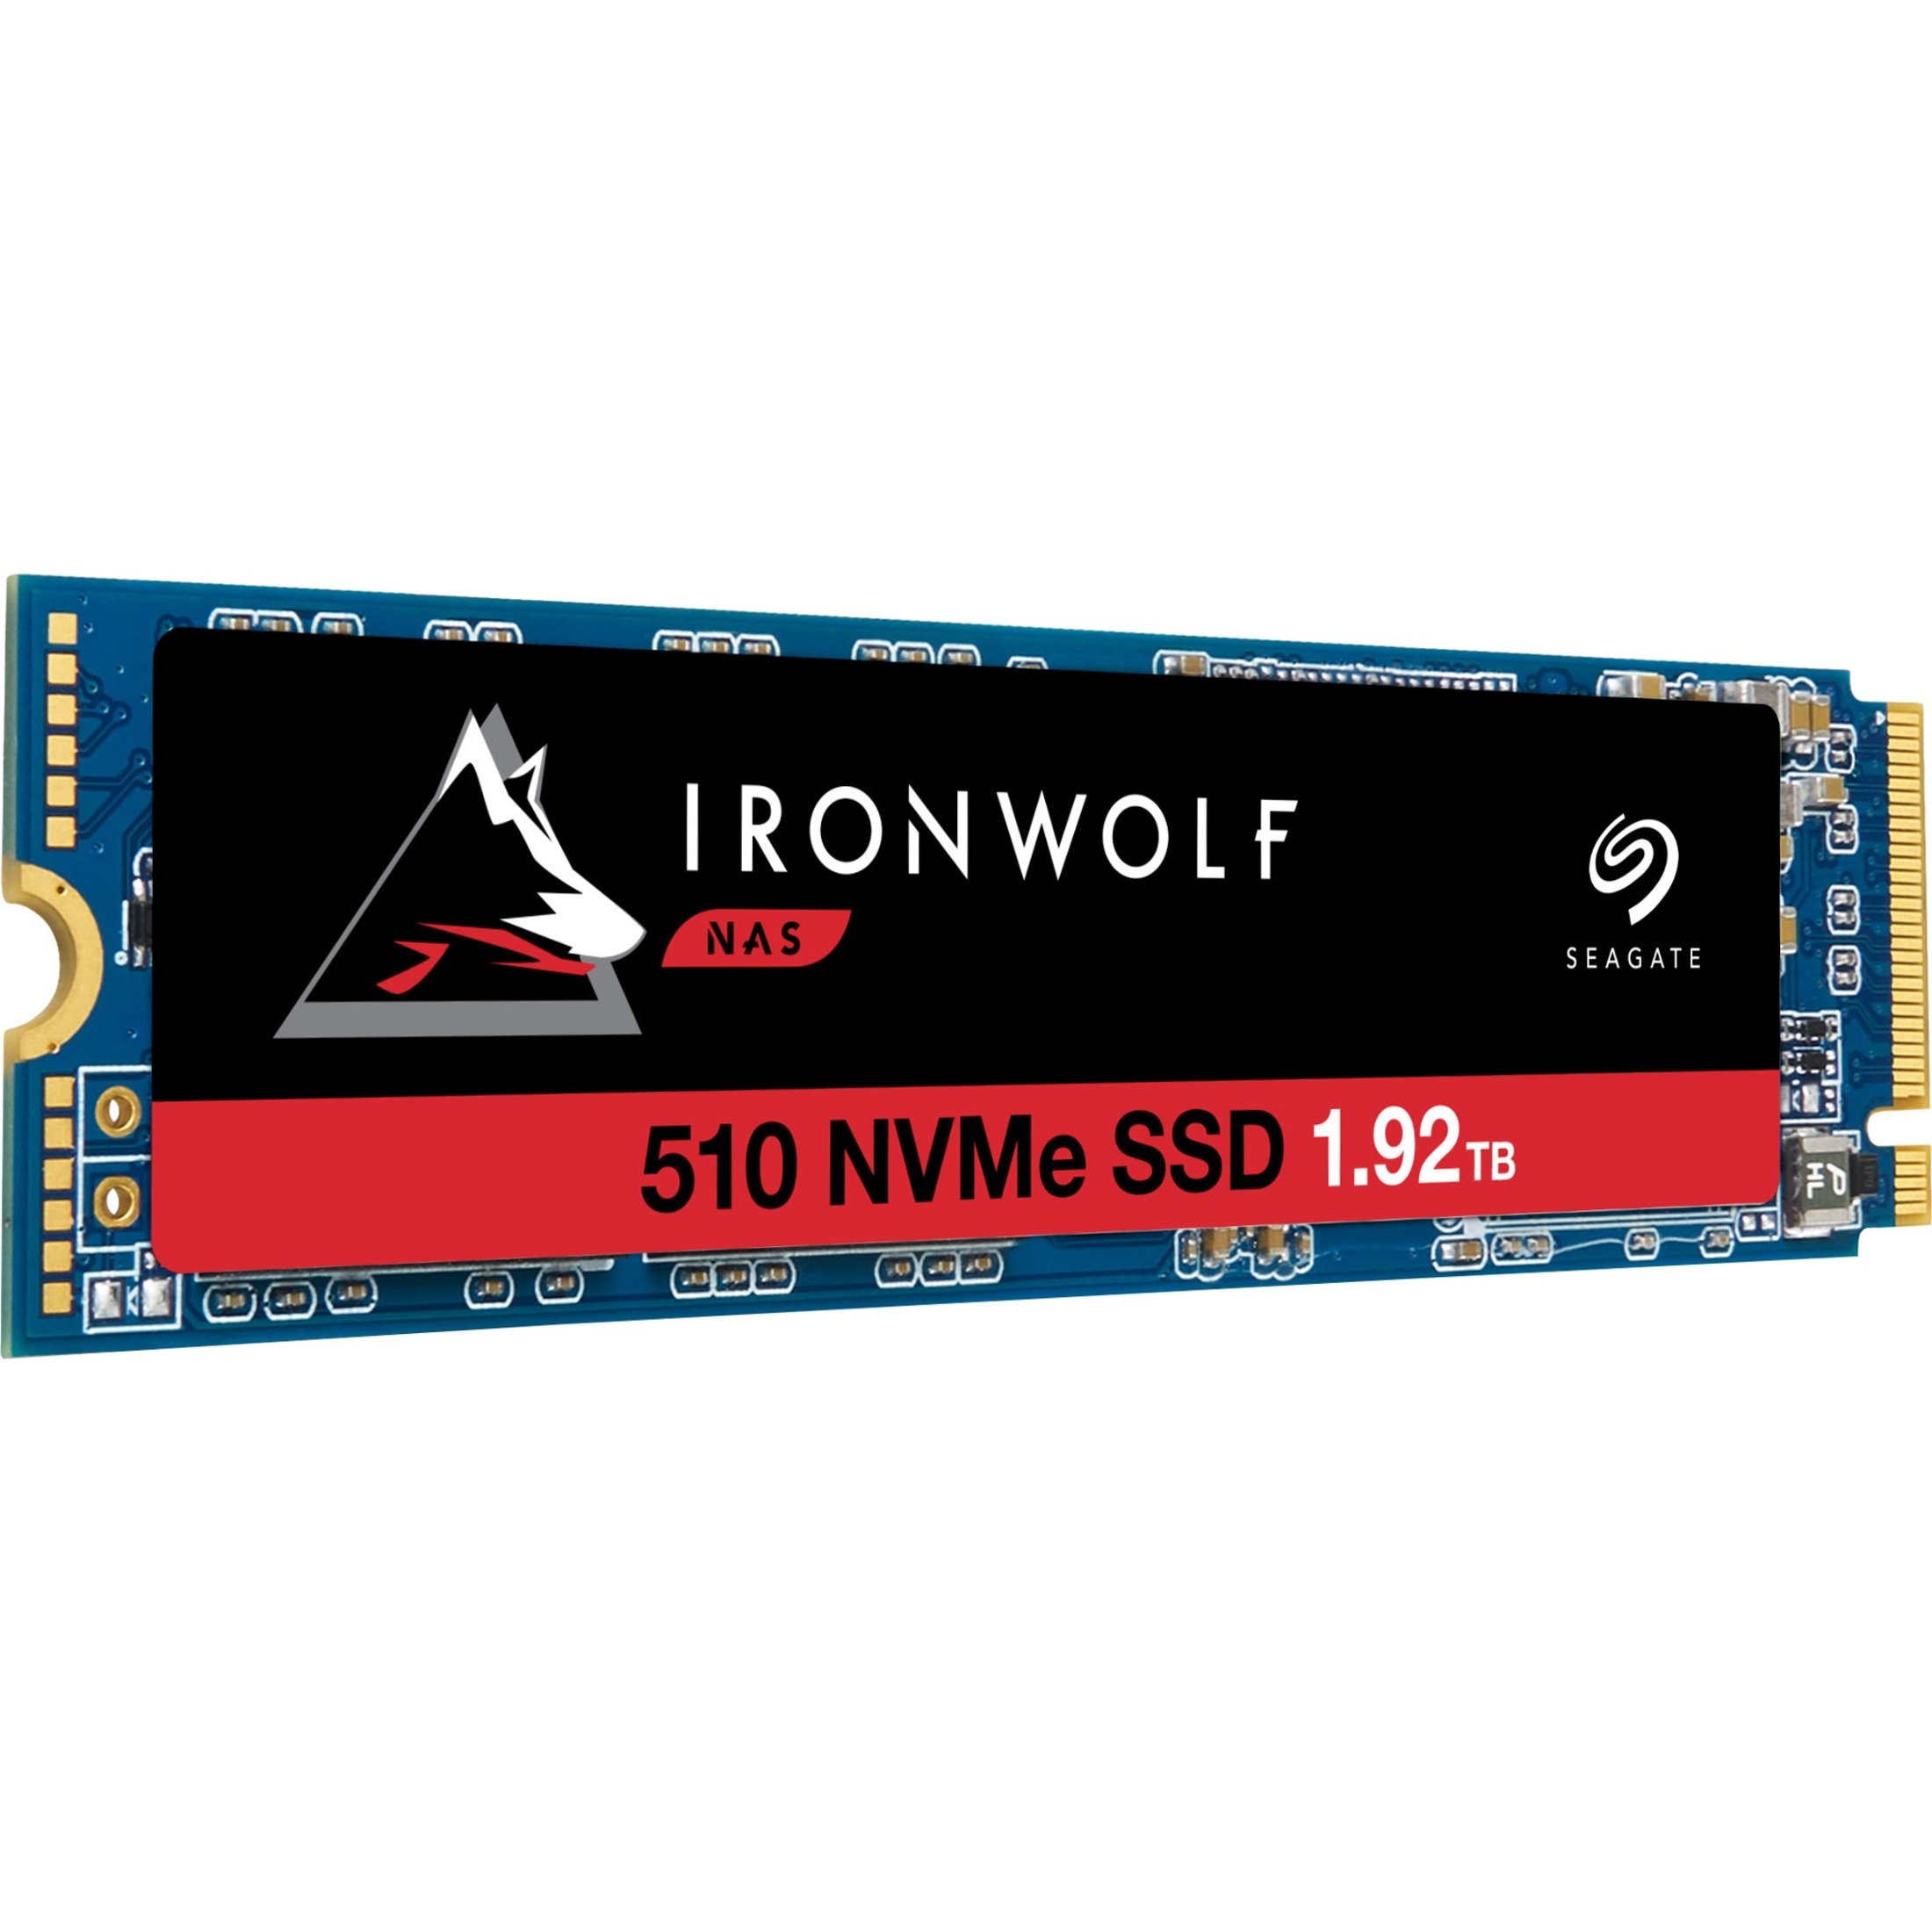 Seagate IronWolf 510 1.92TB NAS SSD Internal Solid State Drive – M.2 PCIe for Multibay RAID System Network Attached Storage (ZP1920NM30011) - image 3 of 4